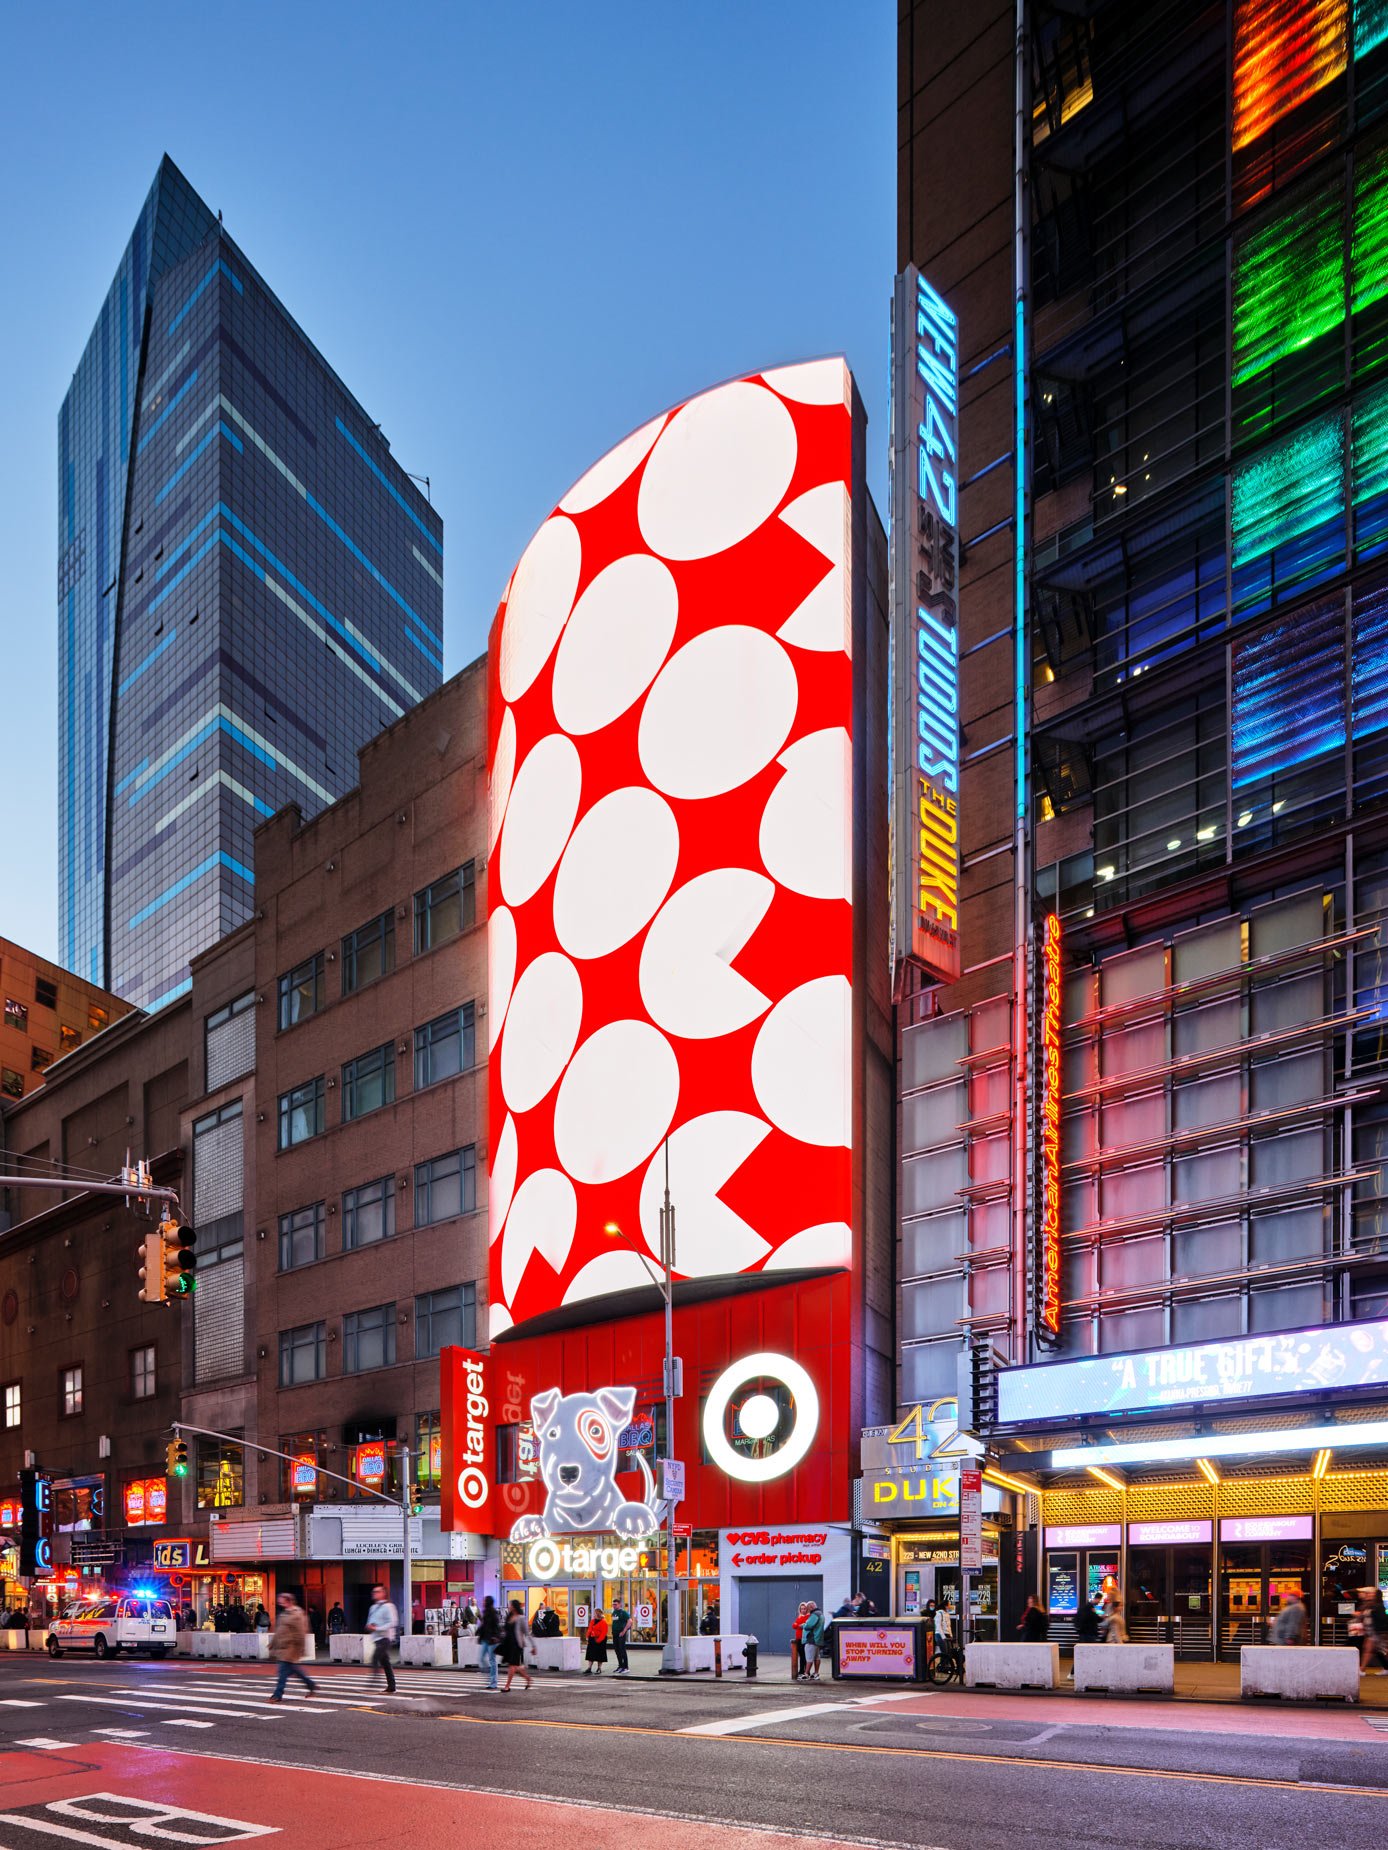  Target Times Square Target NYC, NY See more in  Retail  